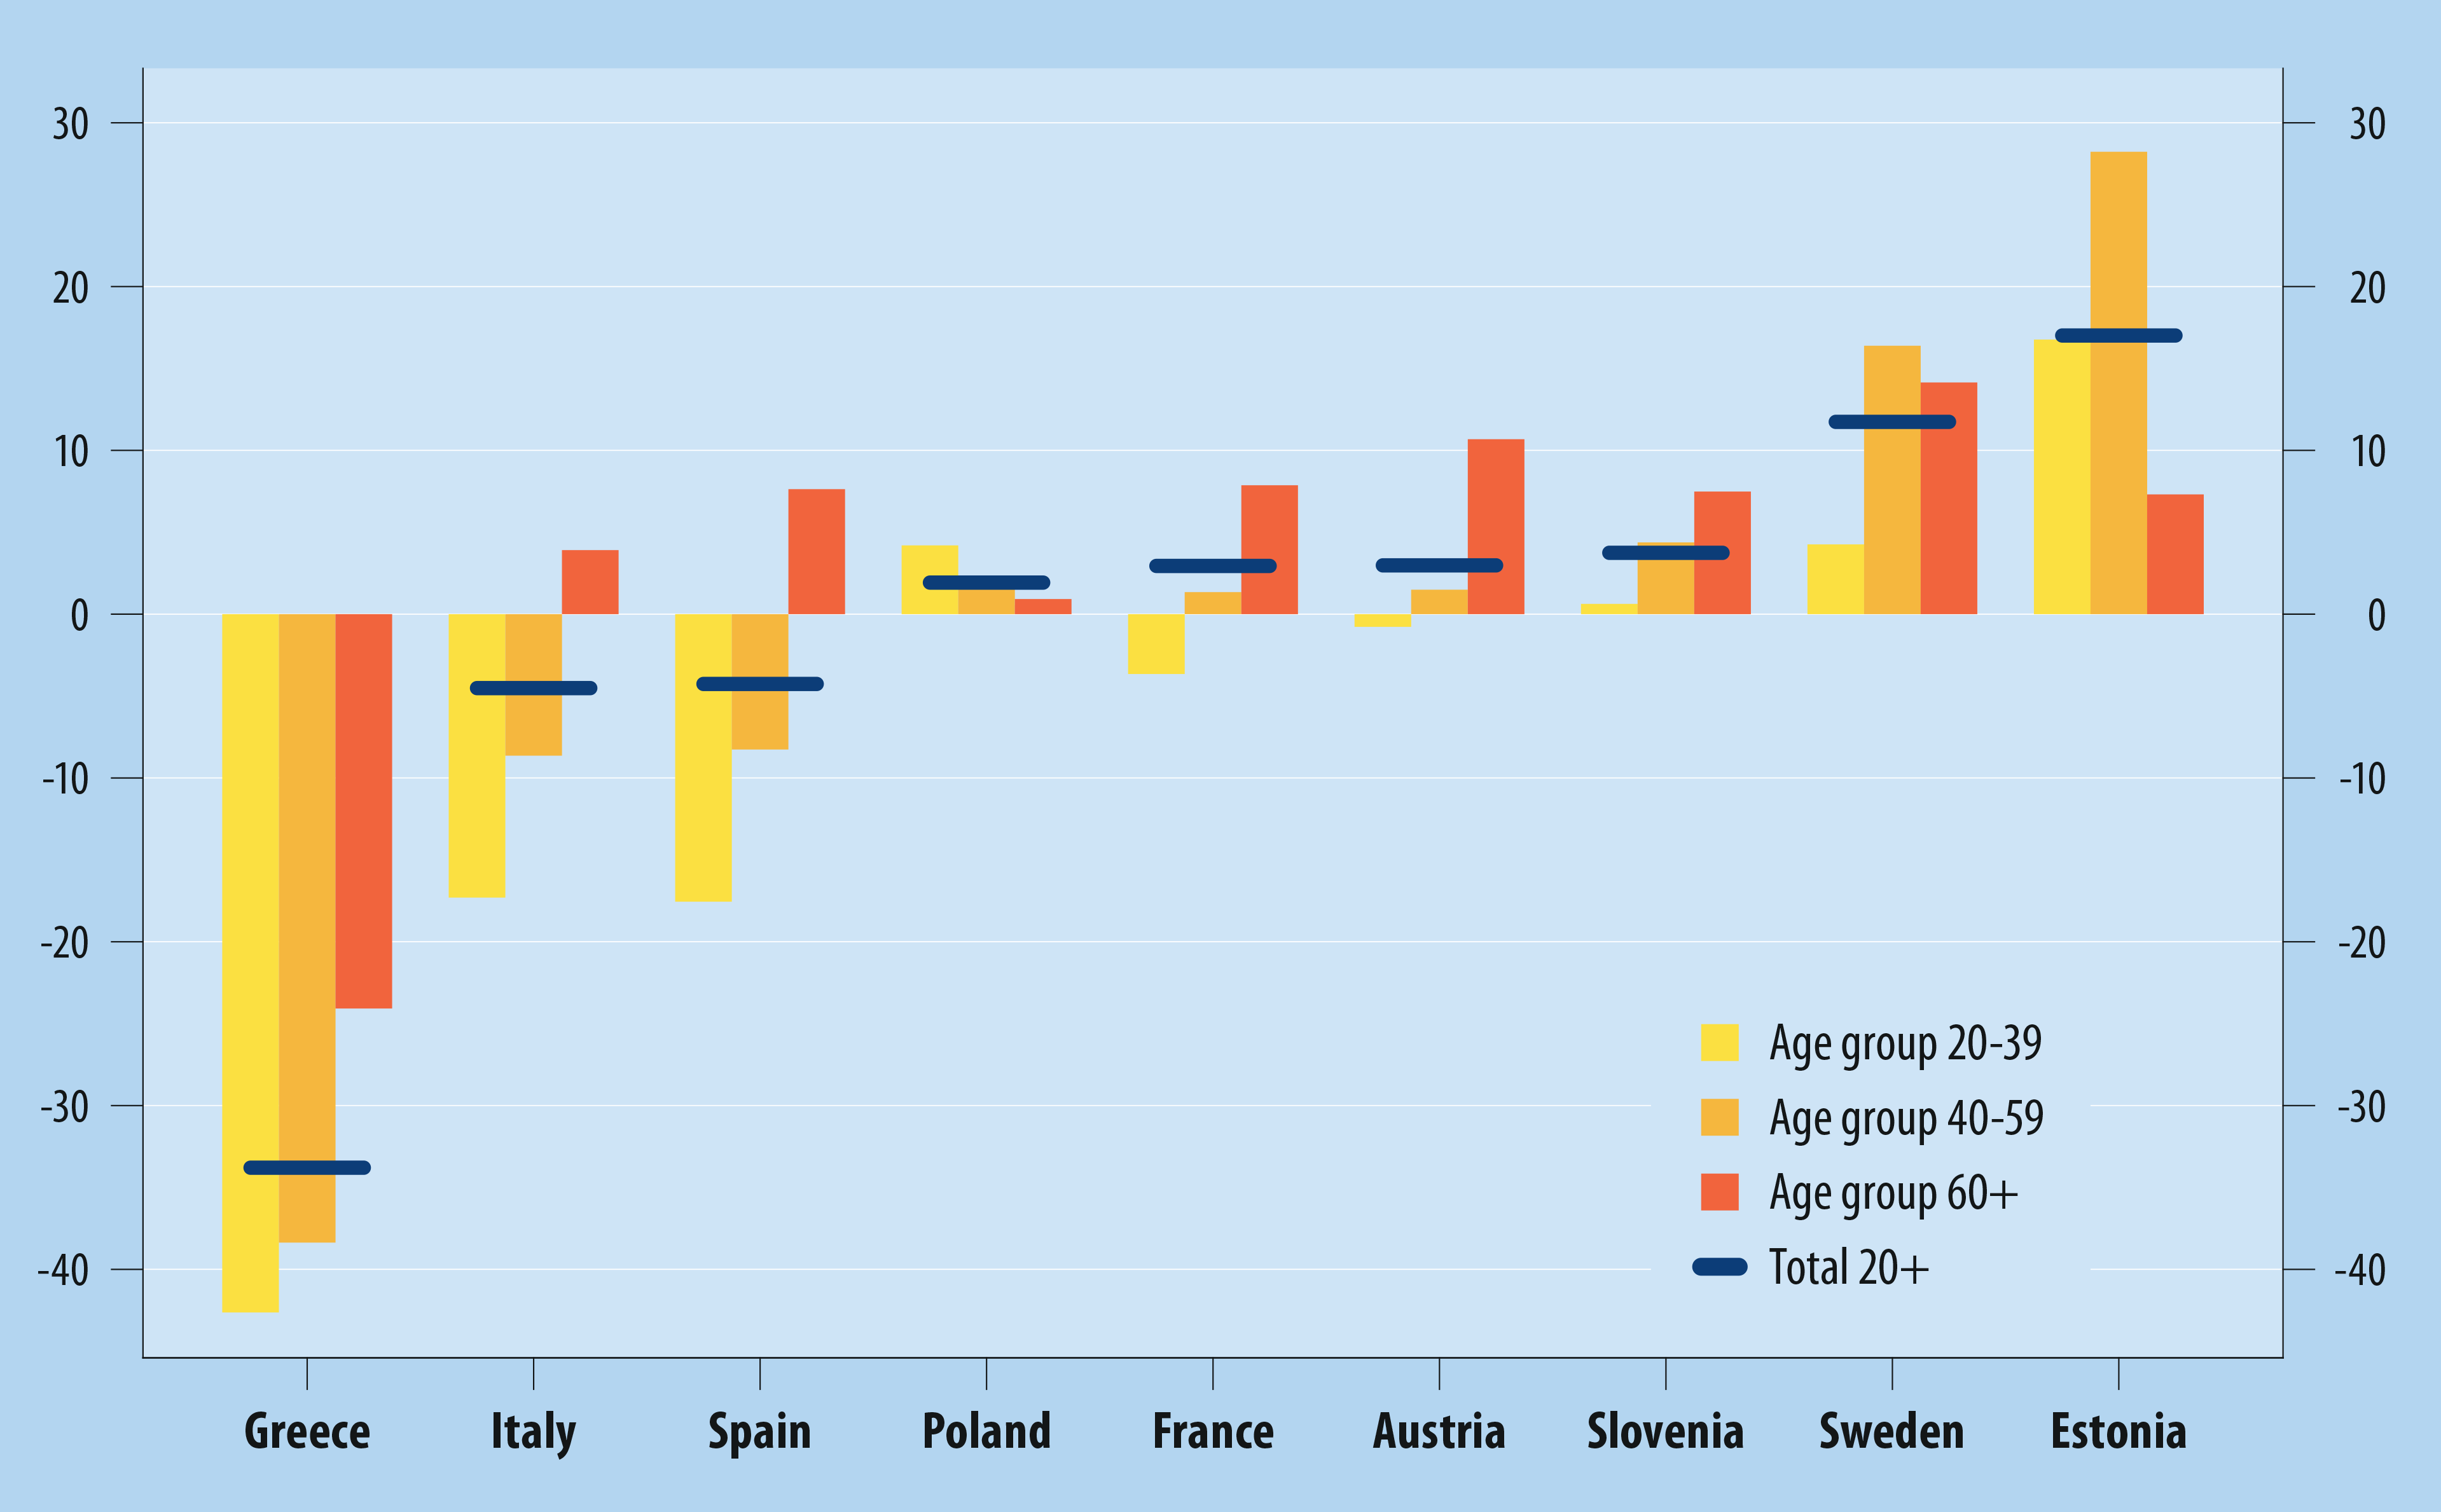 Income disparities between young and old Europeans